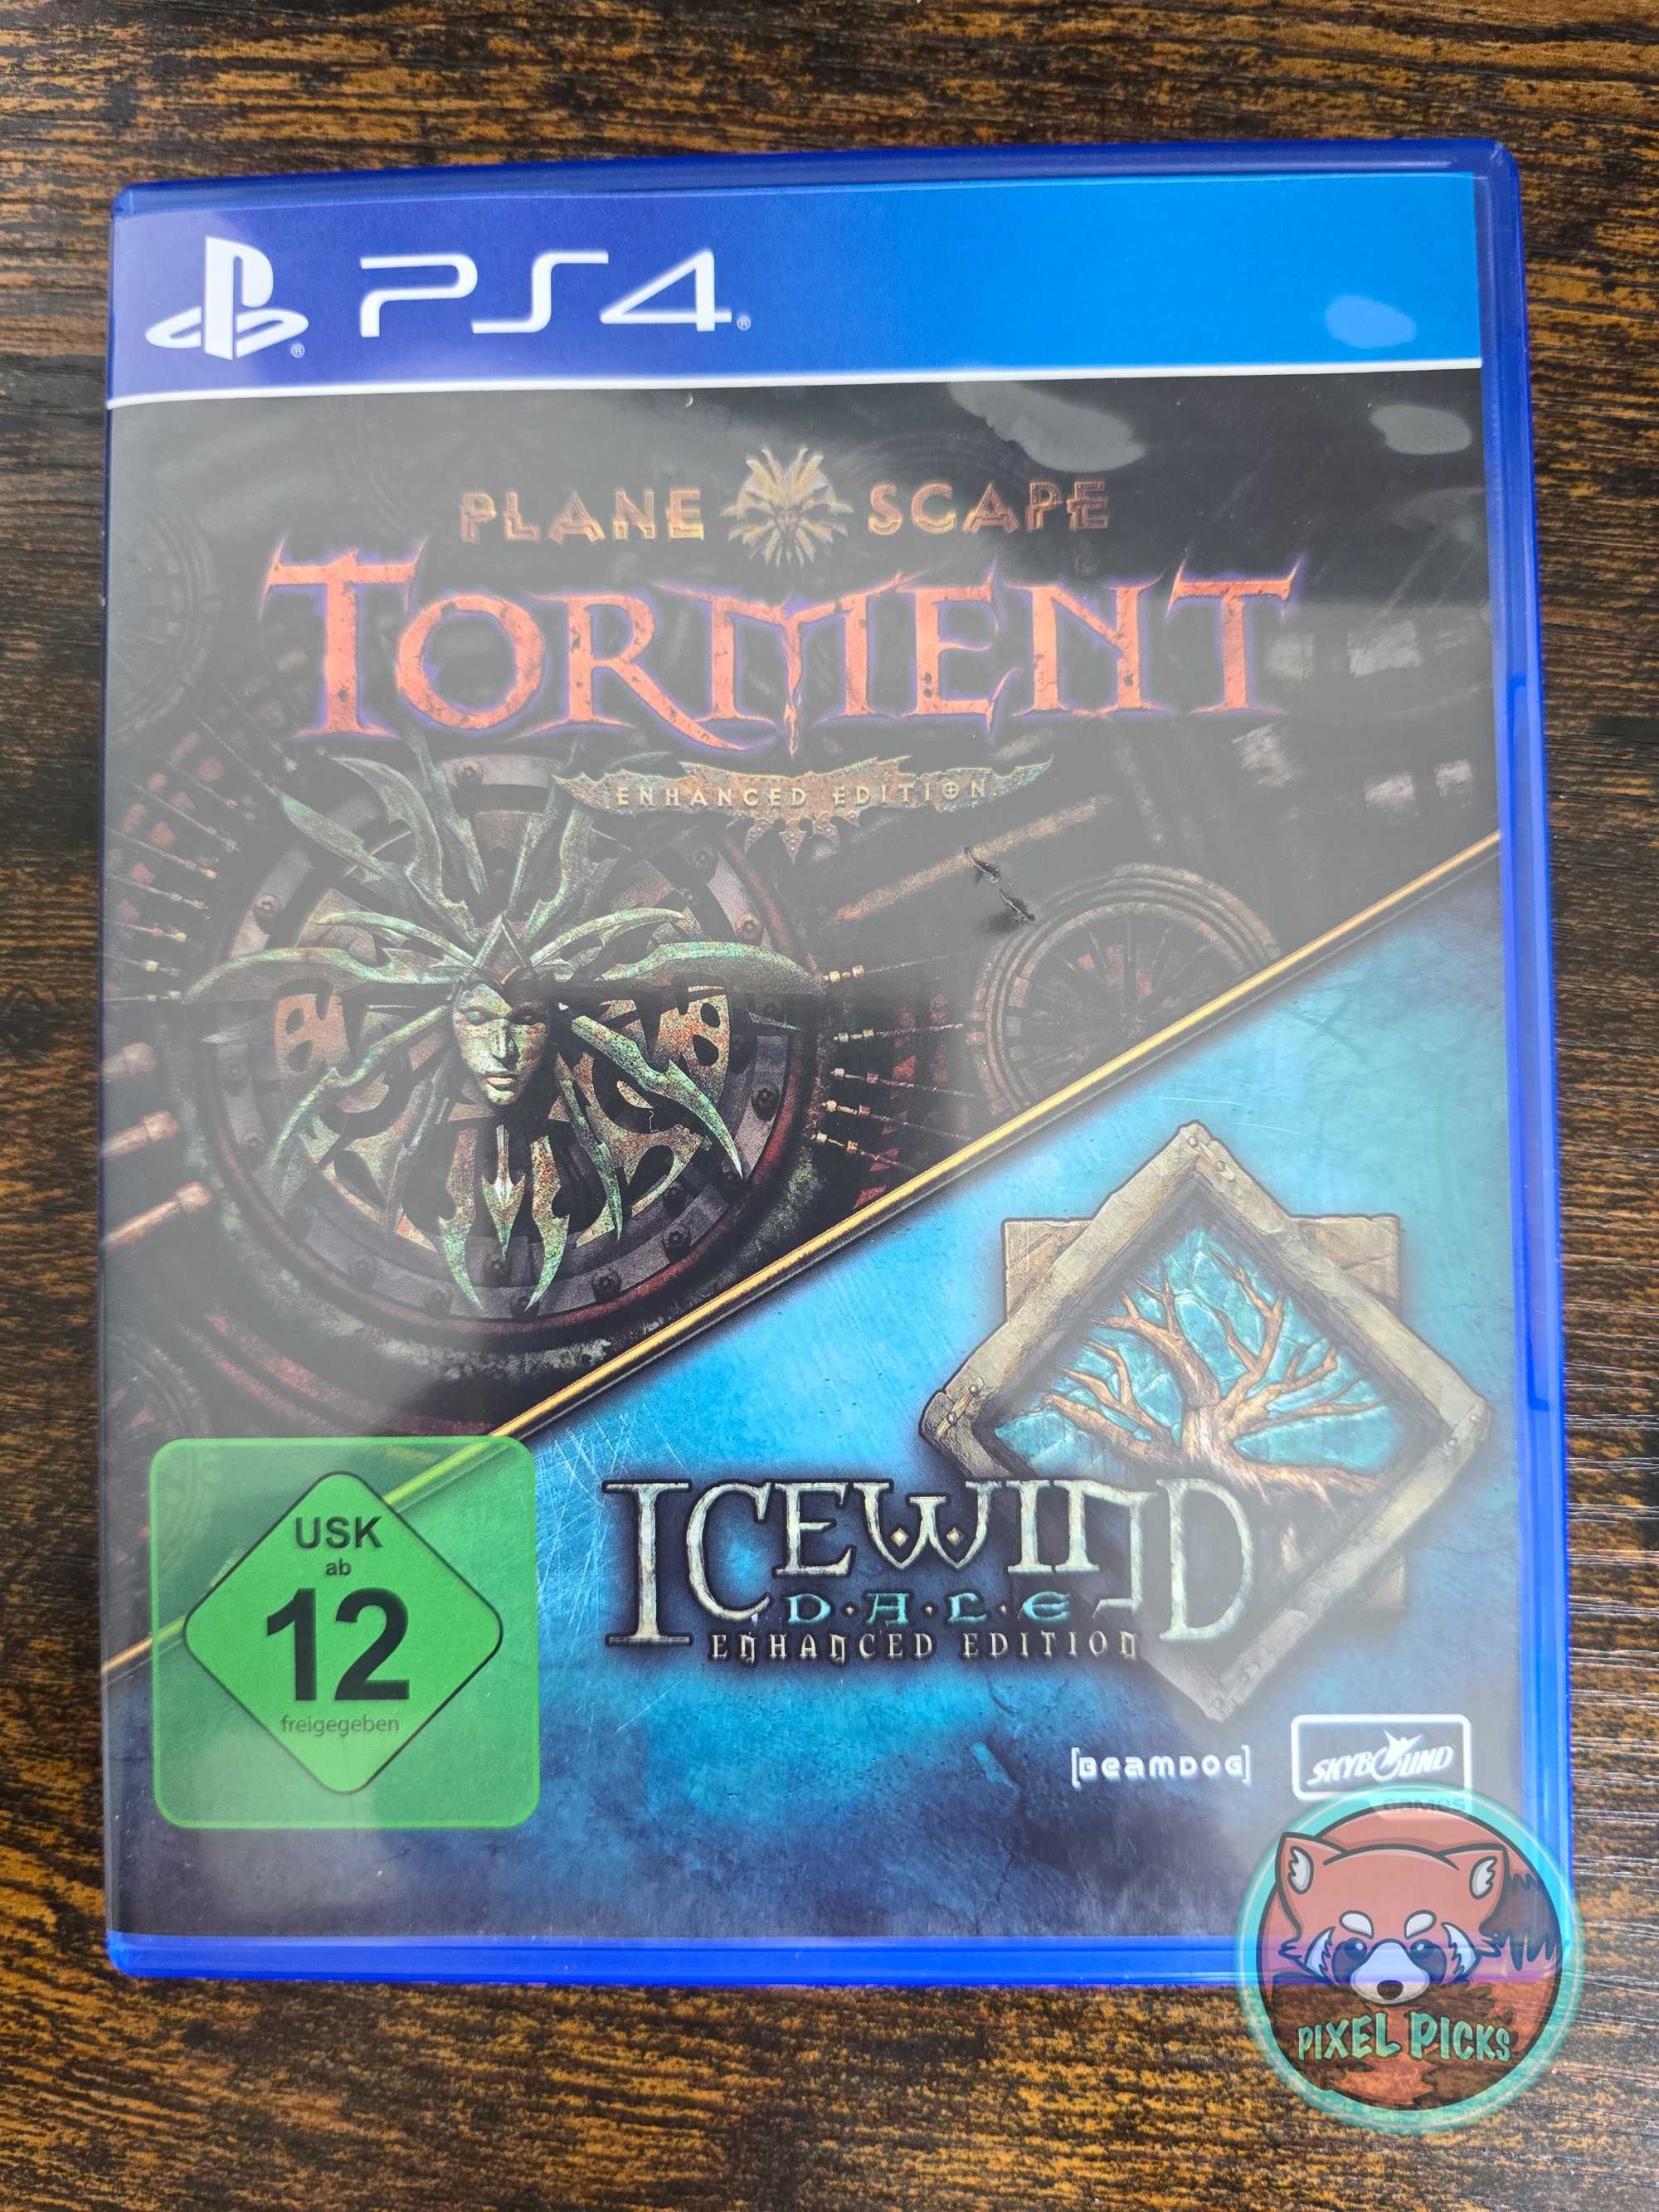 Planescape Torment & Icewind Dale Enhanced Edition PlayStation 4 ps4